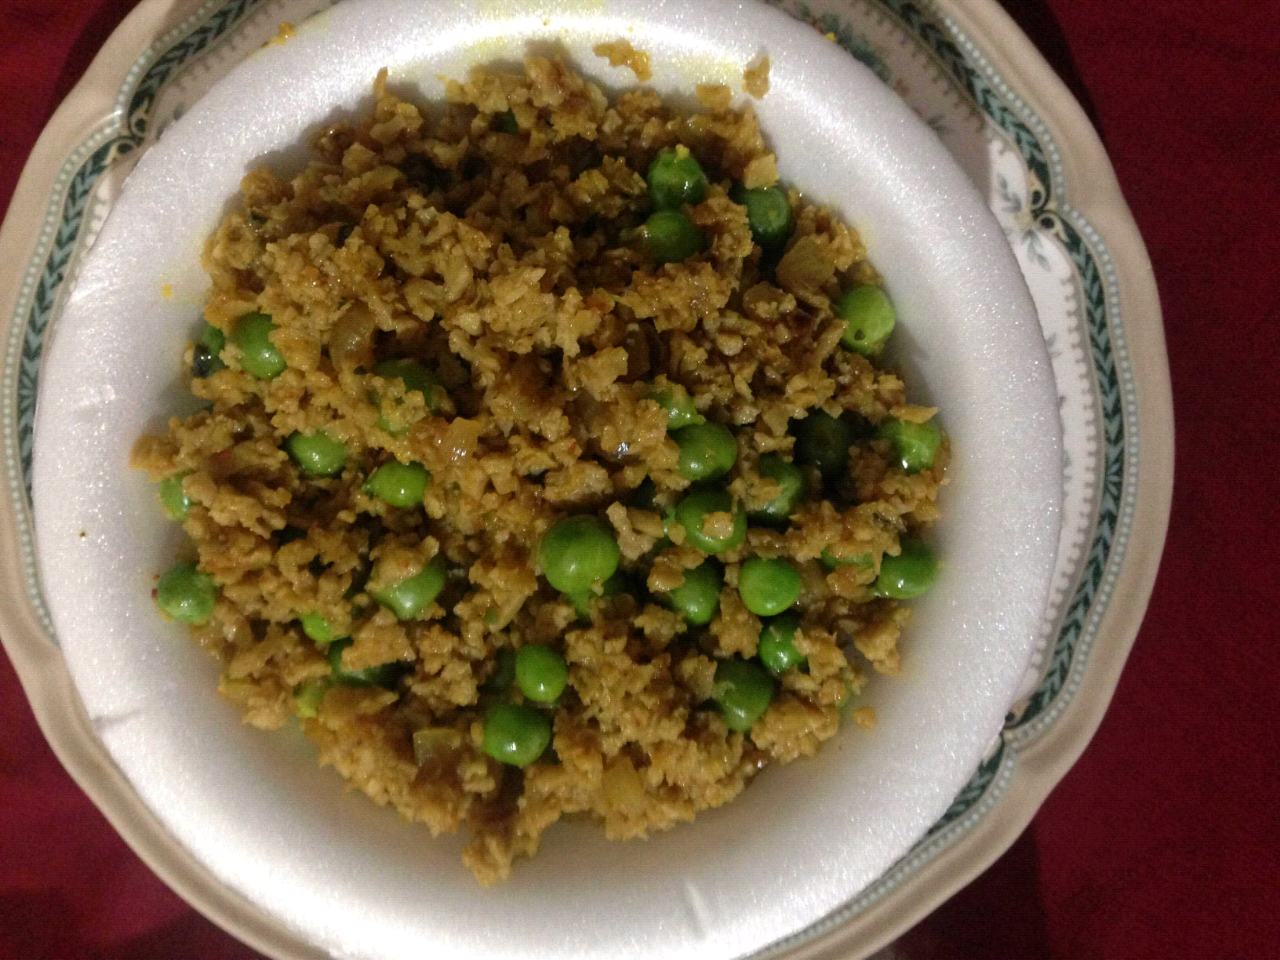 Fat Free Soya Granules with Peas "Health no Compromise"